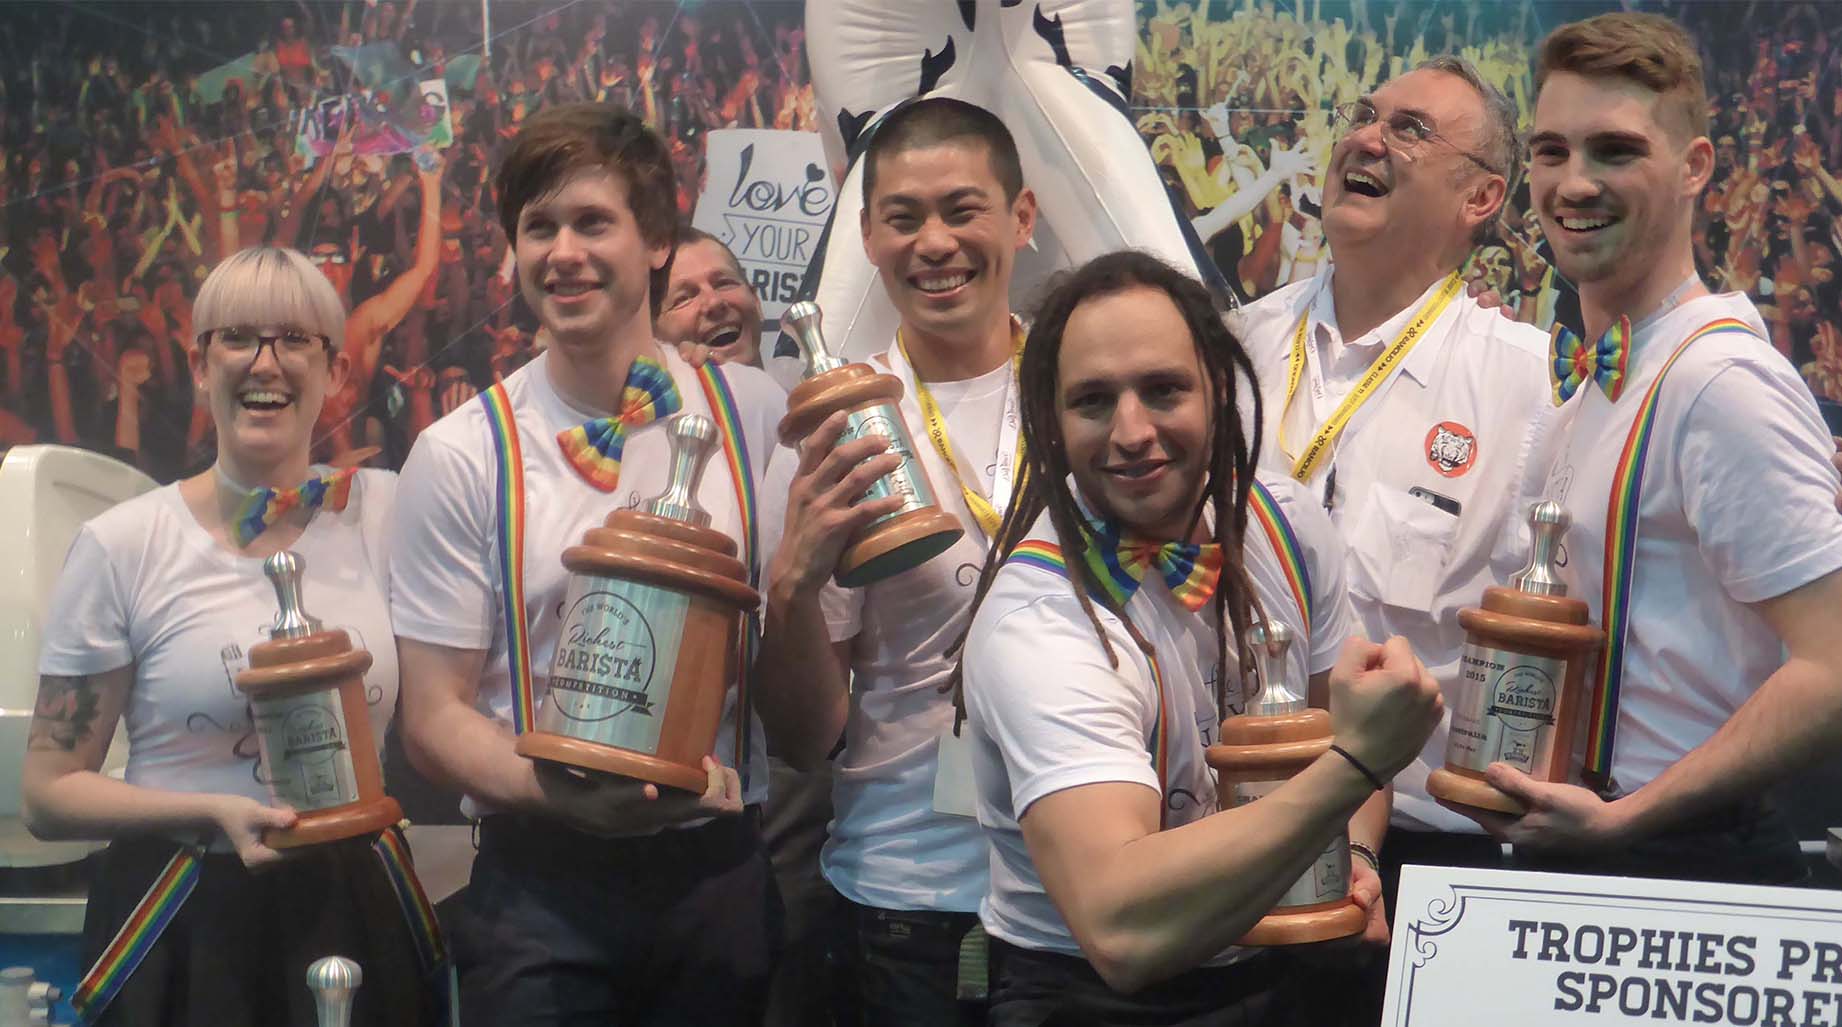 A group of 6 people with trophies